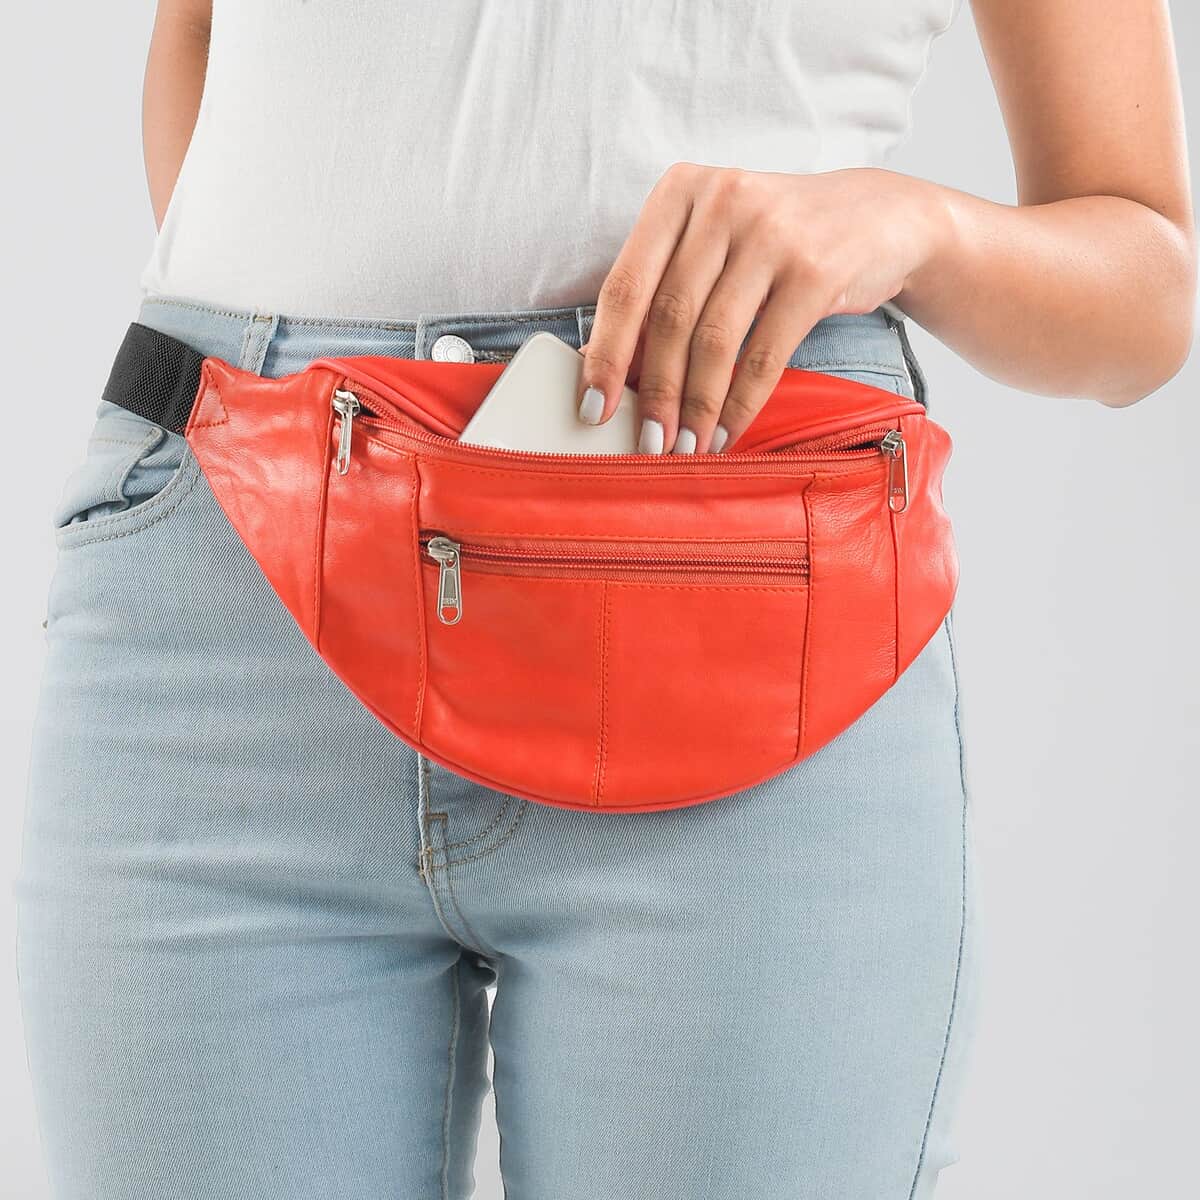 "RFID Protected 100% Genuine Leather Fanny Bag Size: 15x6.25 inches Color: Red" image number 2